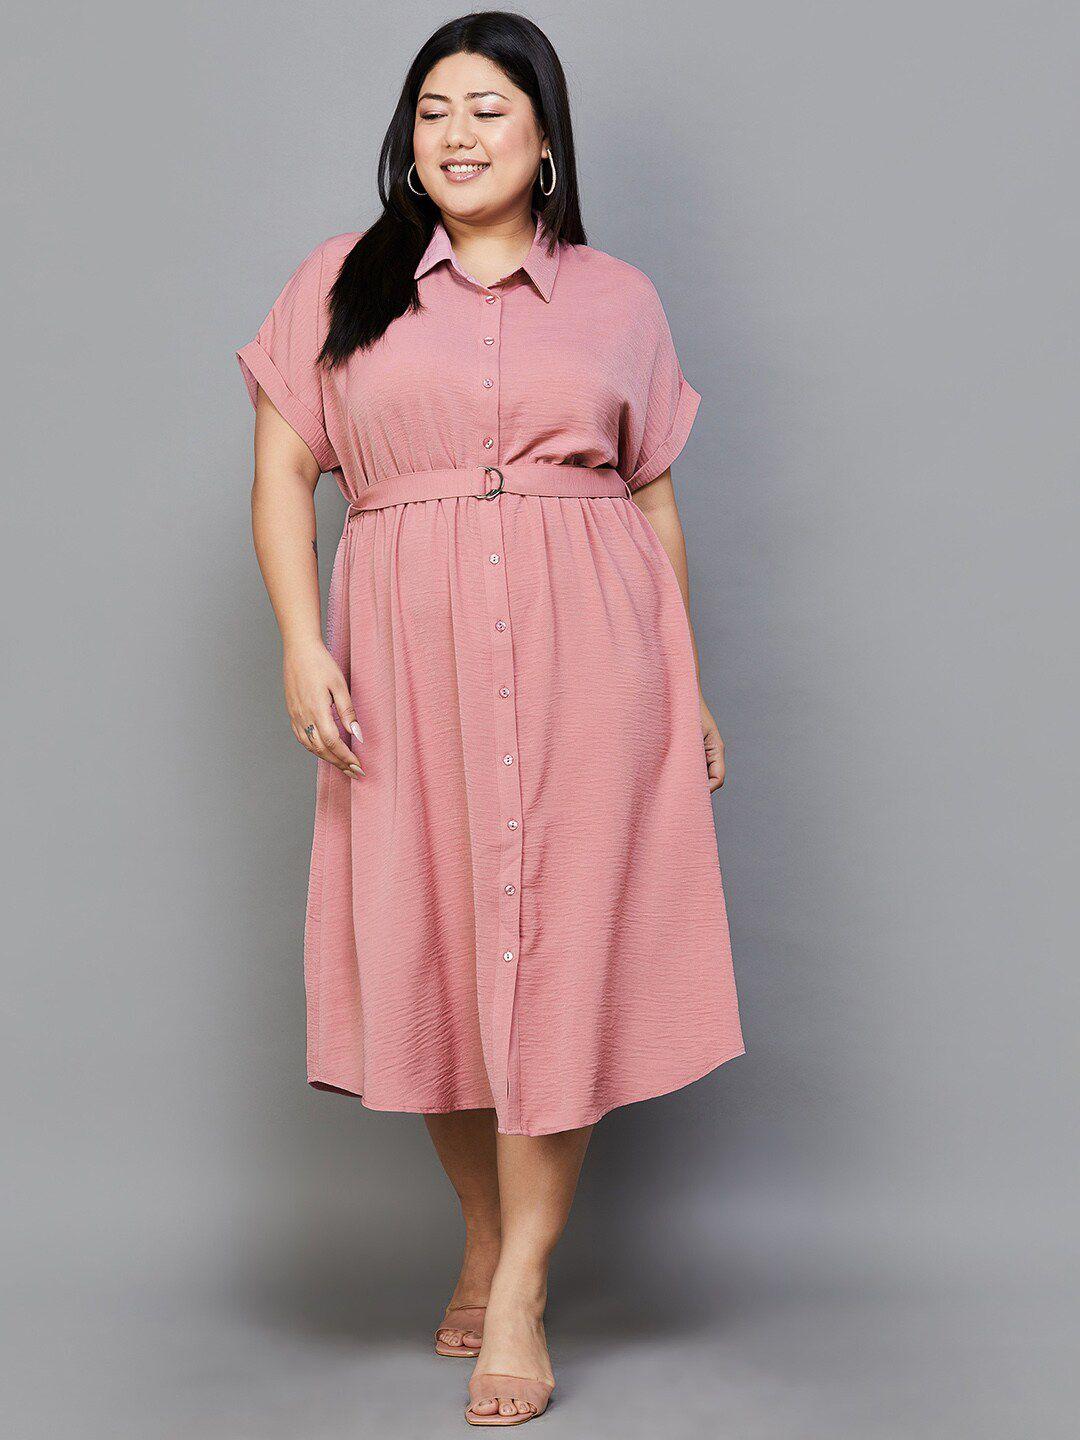 nexus by lifestyle plus size extended sleeves shirt style midi dress